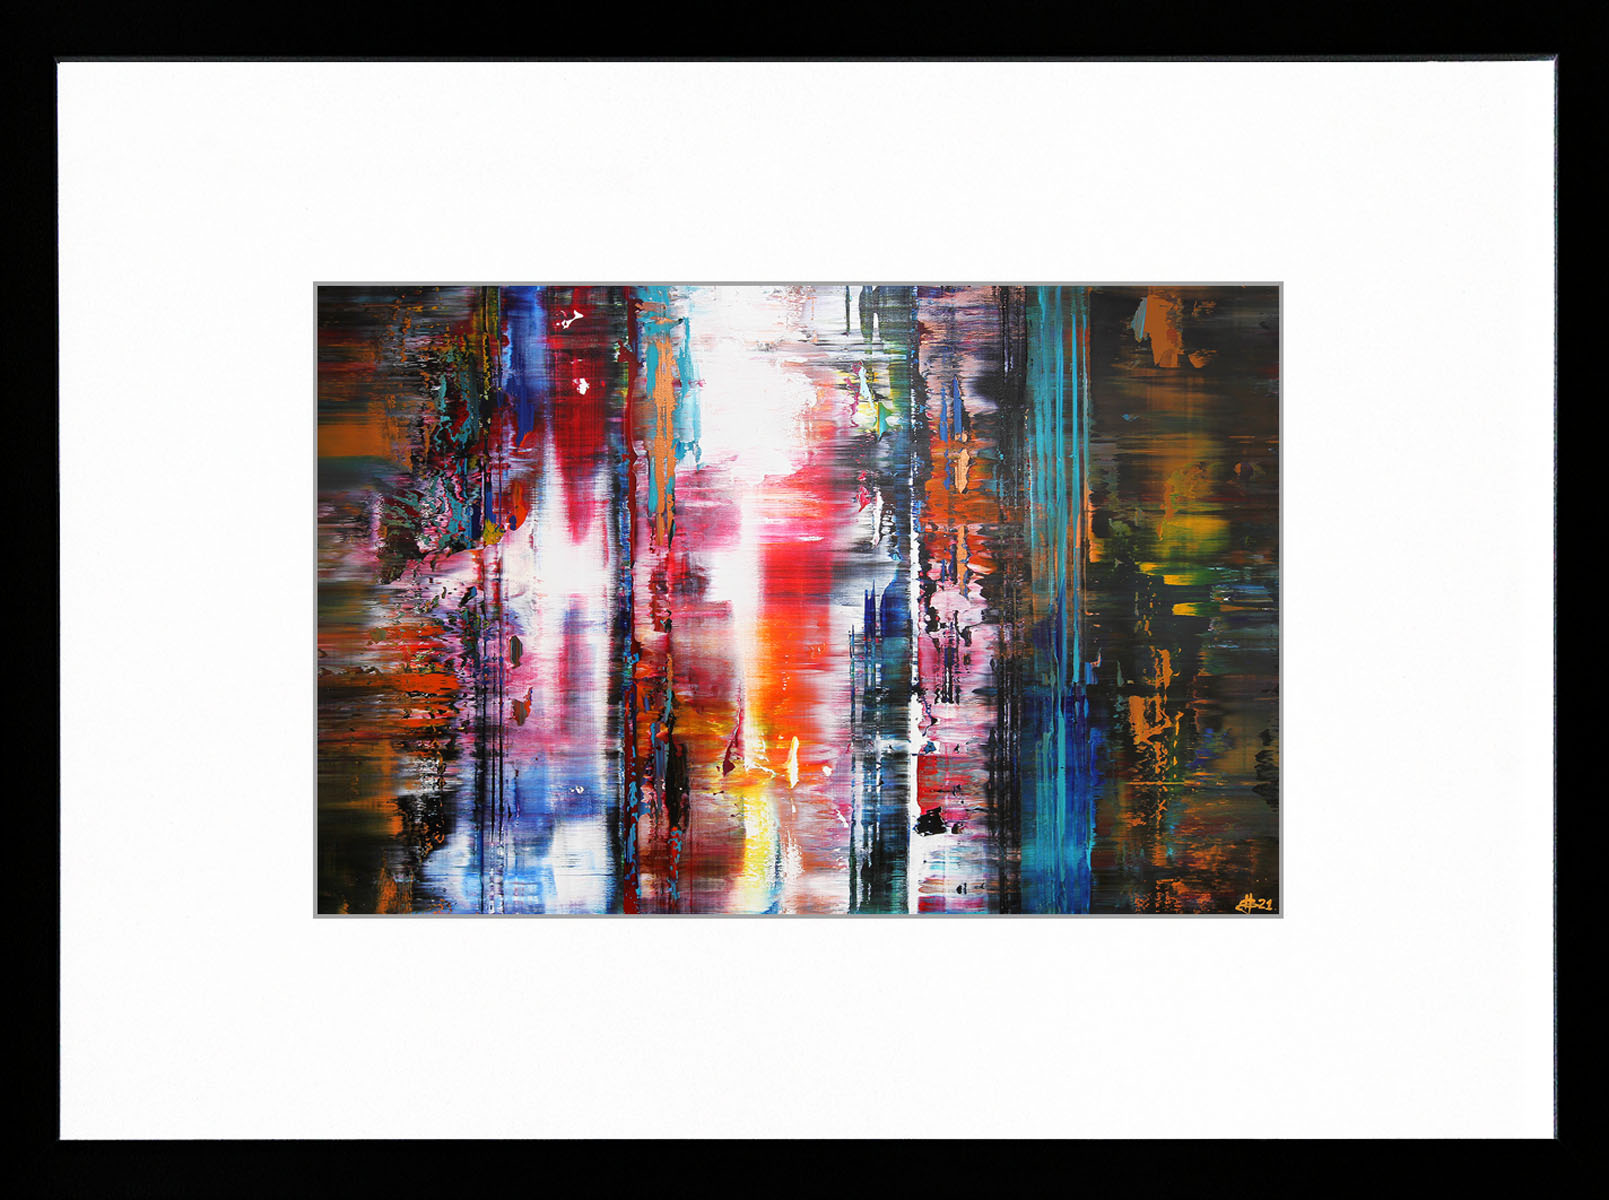 Limitierte Edition auf Papier, Gia Hung: "Altered Carbon I", signierter Fineartprint, Nr. 2/150